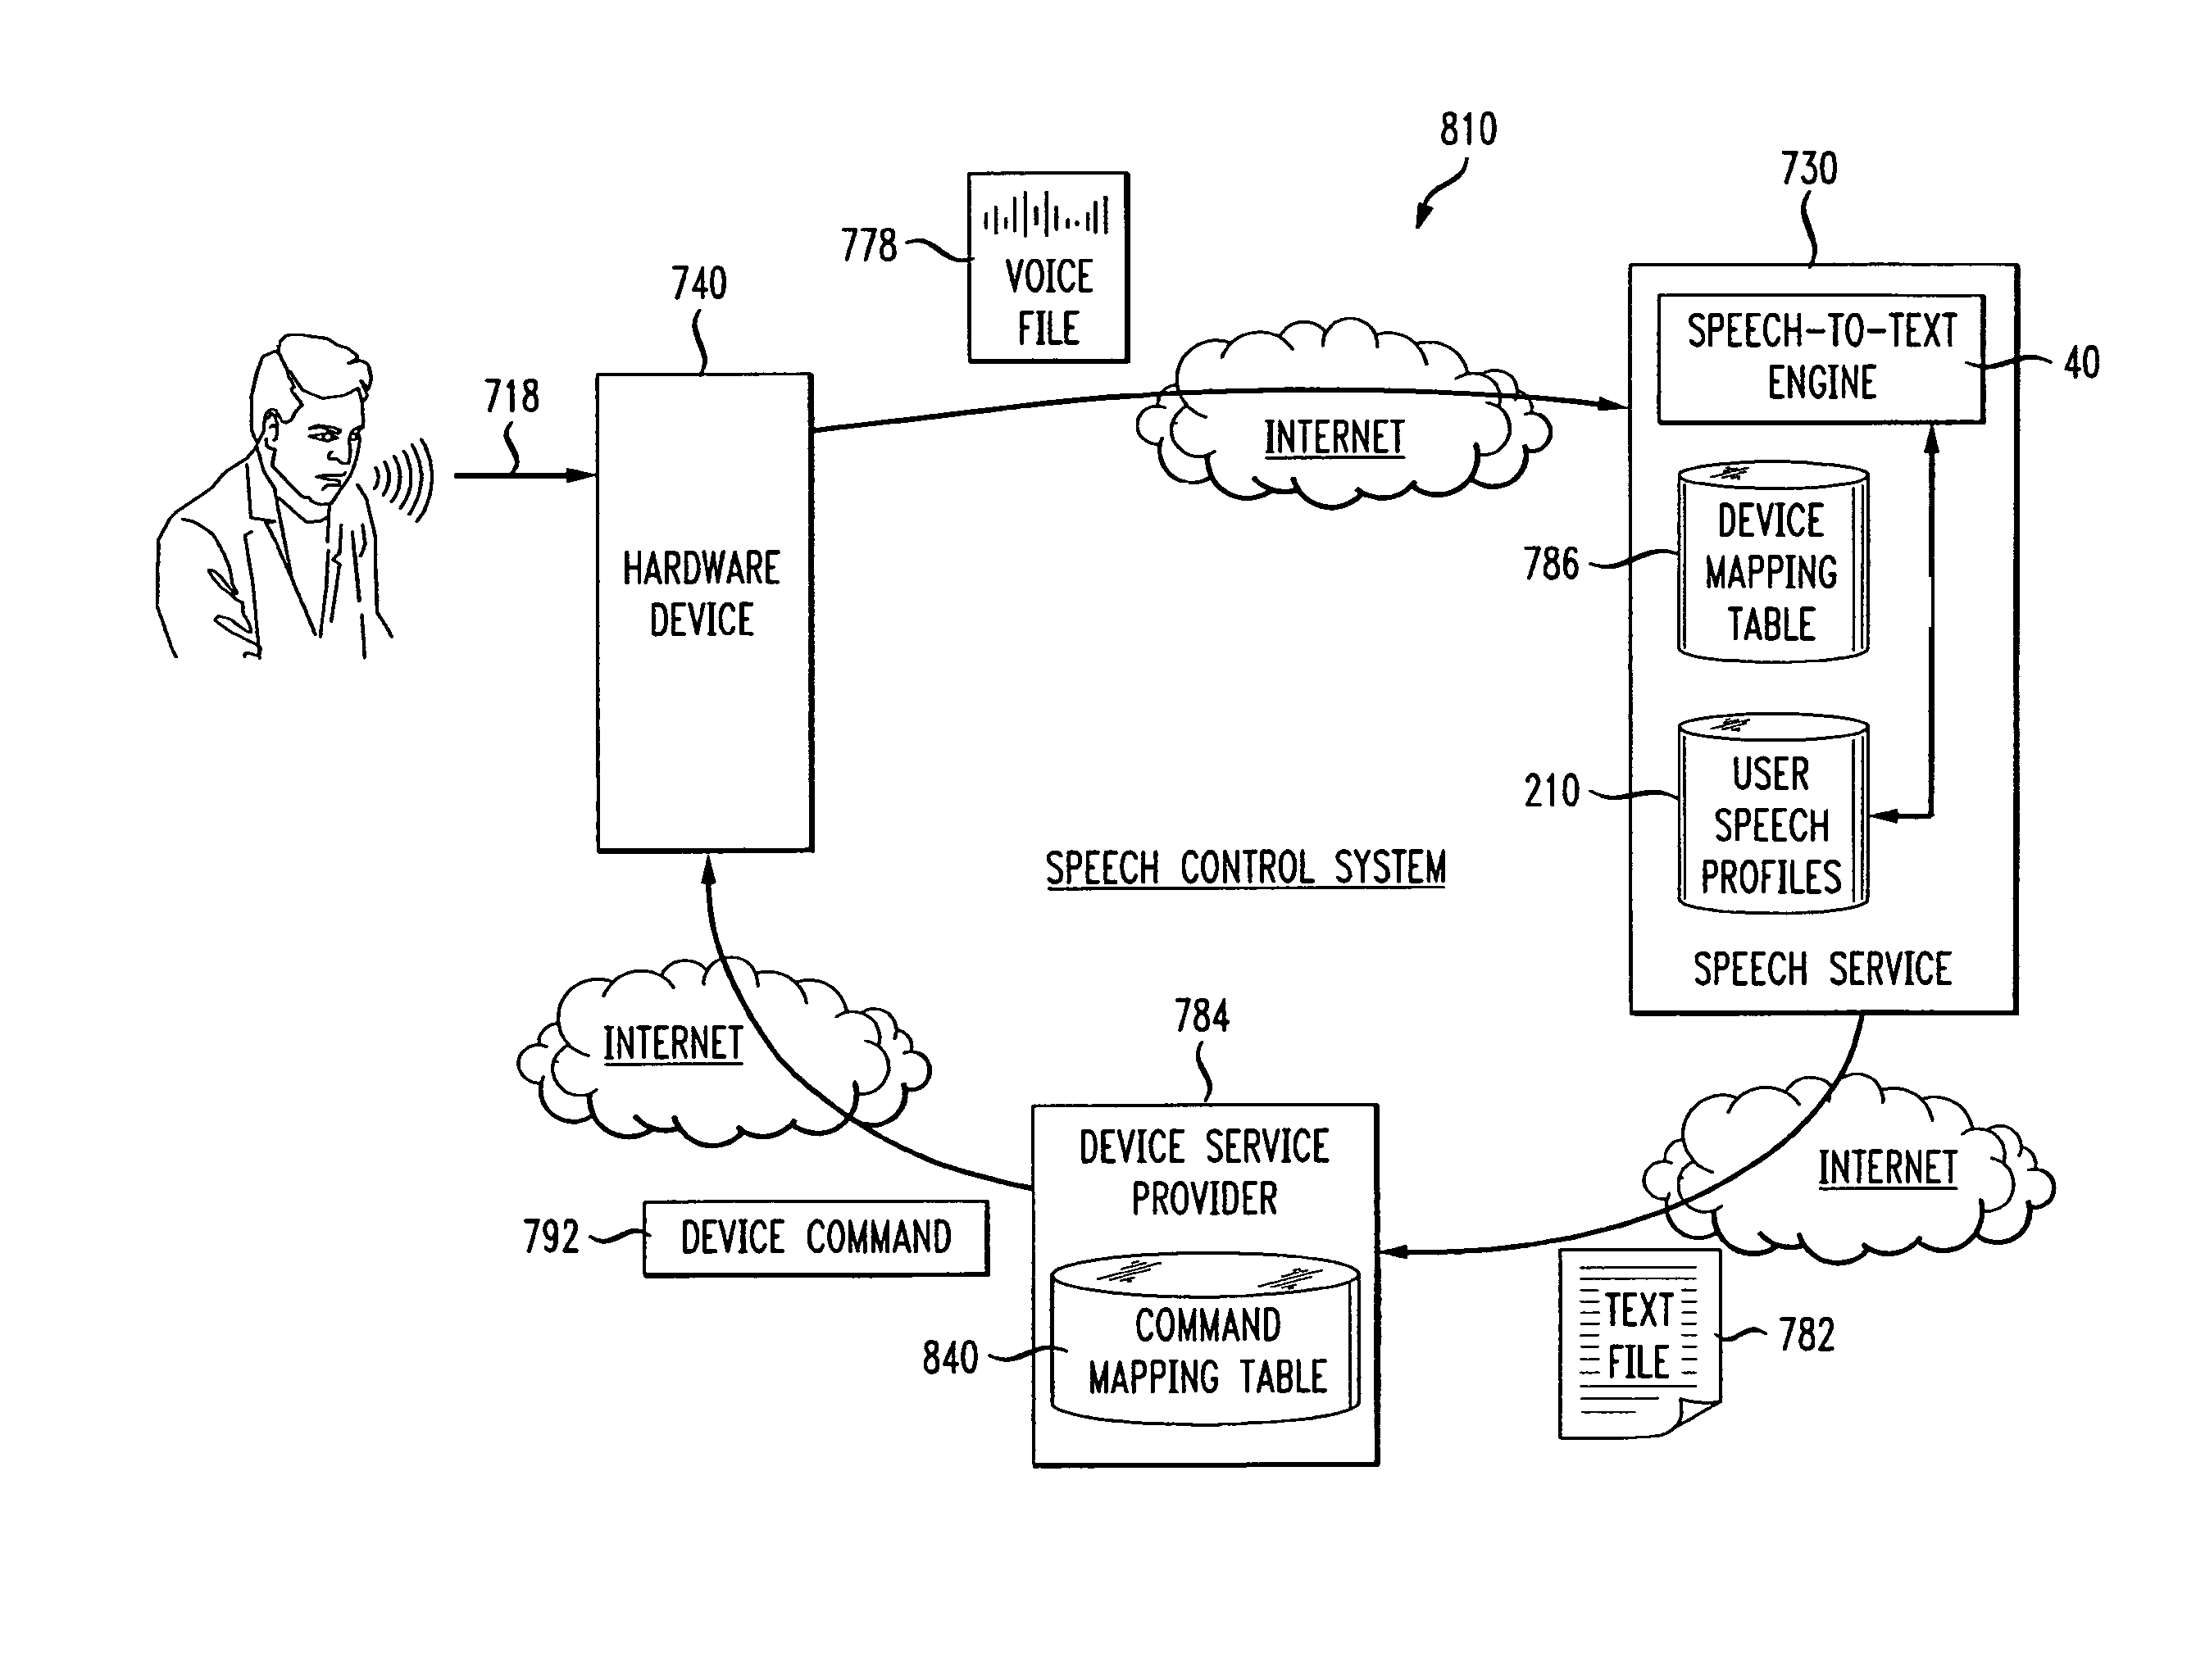 Speech controlled services and devices using internet